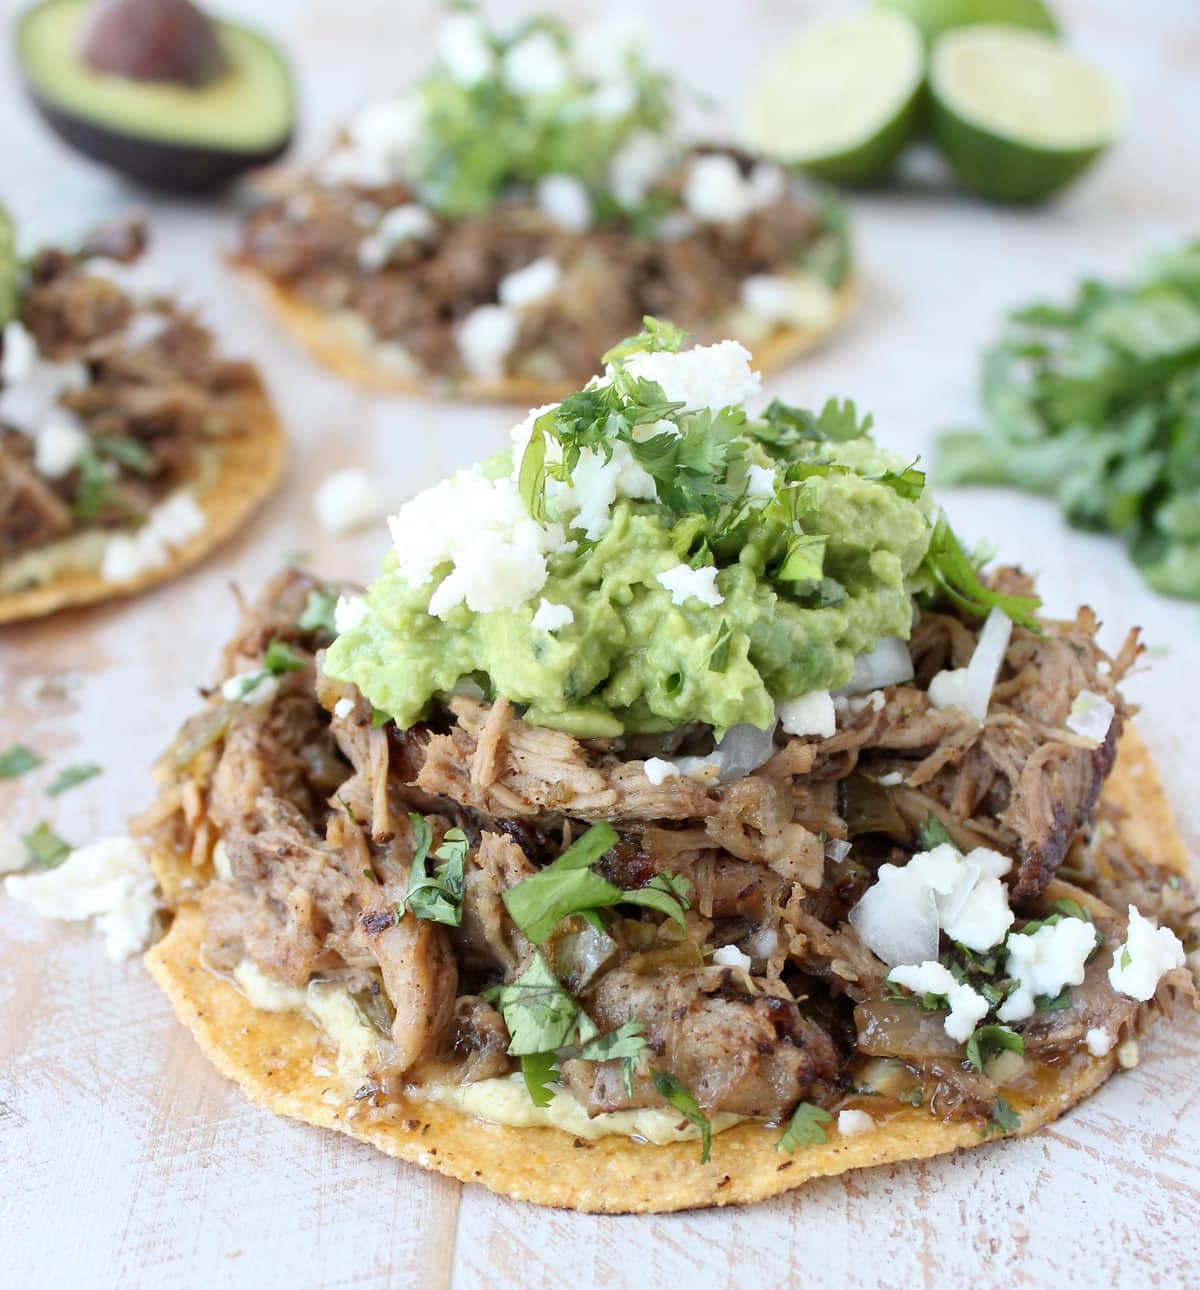 shredded carnitas pork on tostada shell, topped with guacamole and cotija cheese